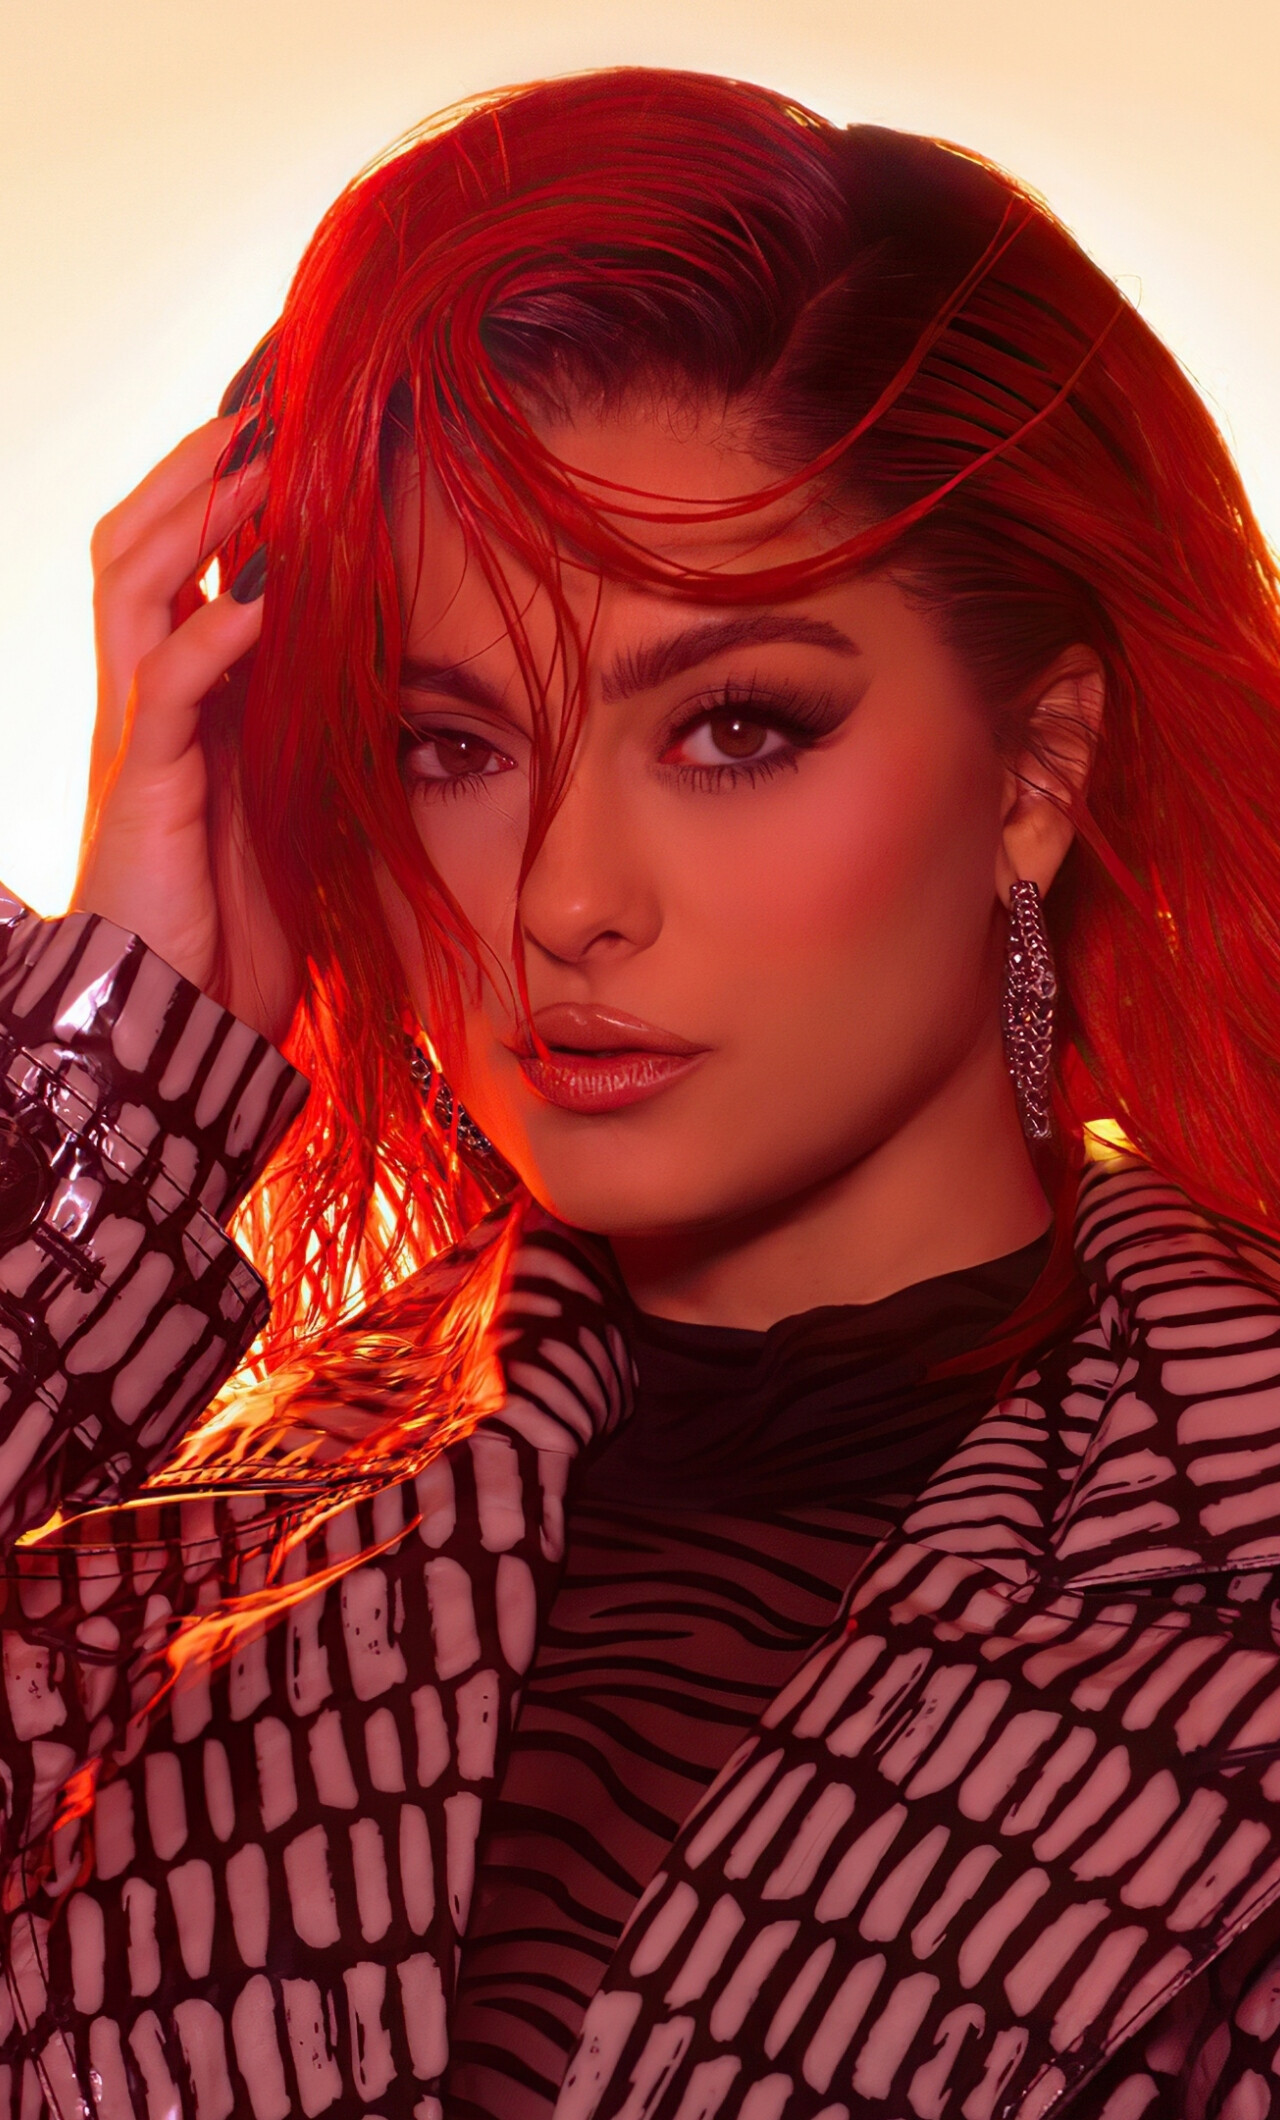 Bebe Rexha: American singer, collaborated on "In the Name of Love" with Martin Garrix. 1280x2120 HD Wallpaper.